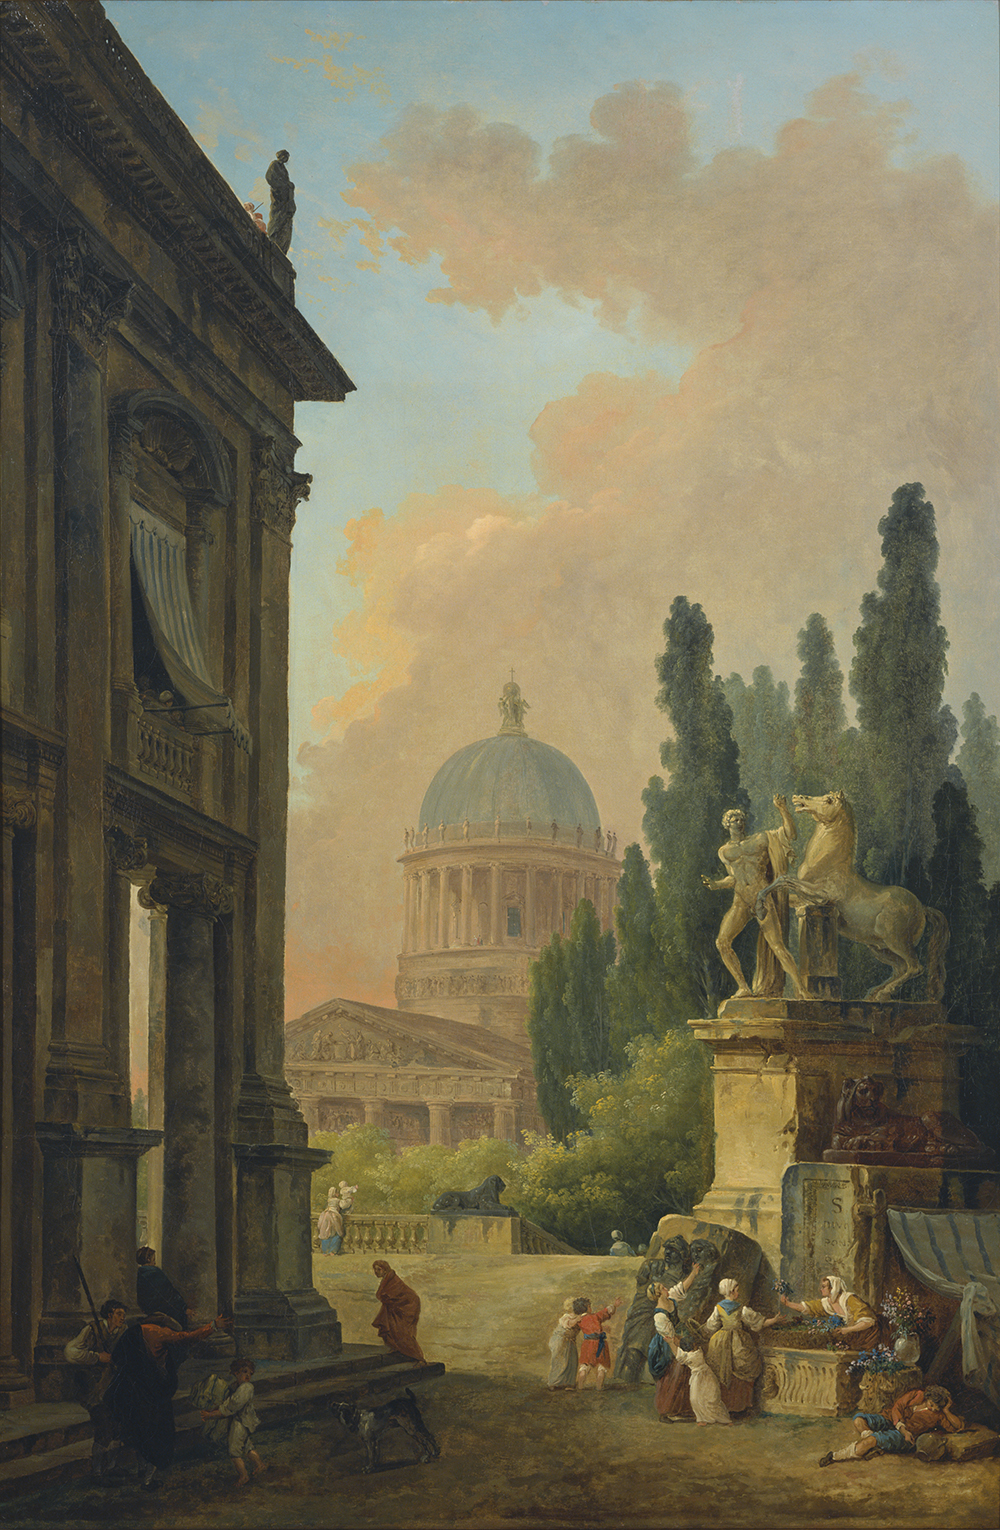 photo:Hubert Robert
Imaginary View of Rome with the Horse-Tamer of the Monte Cavallo and a Church